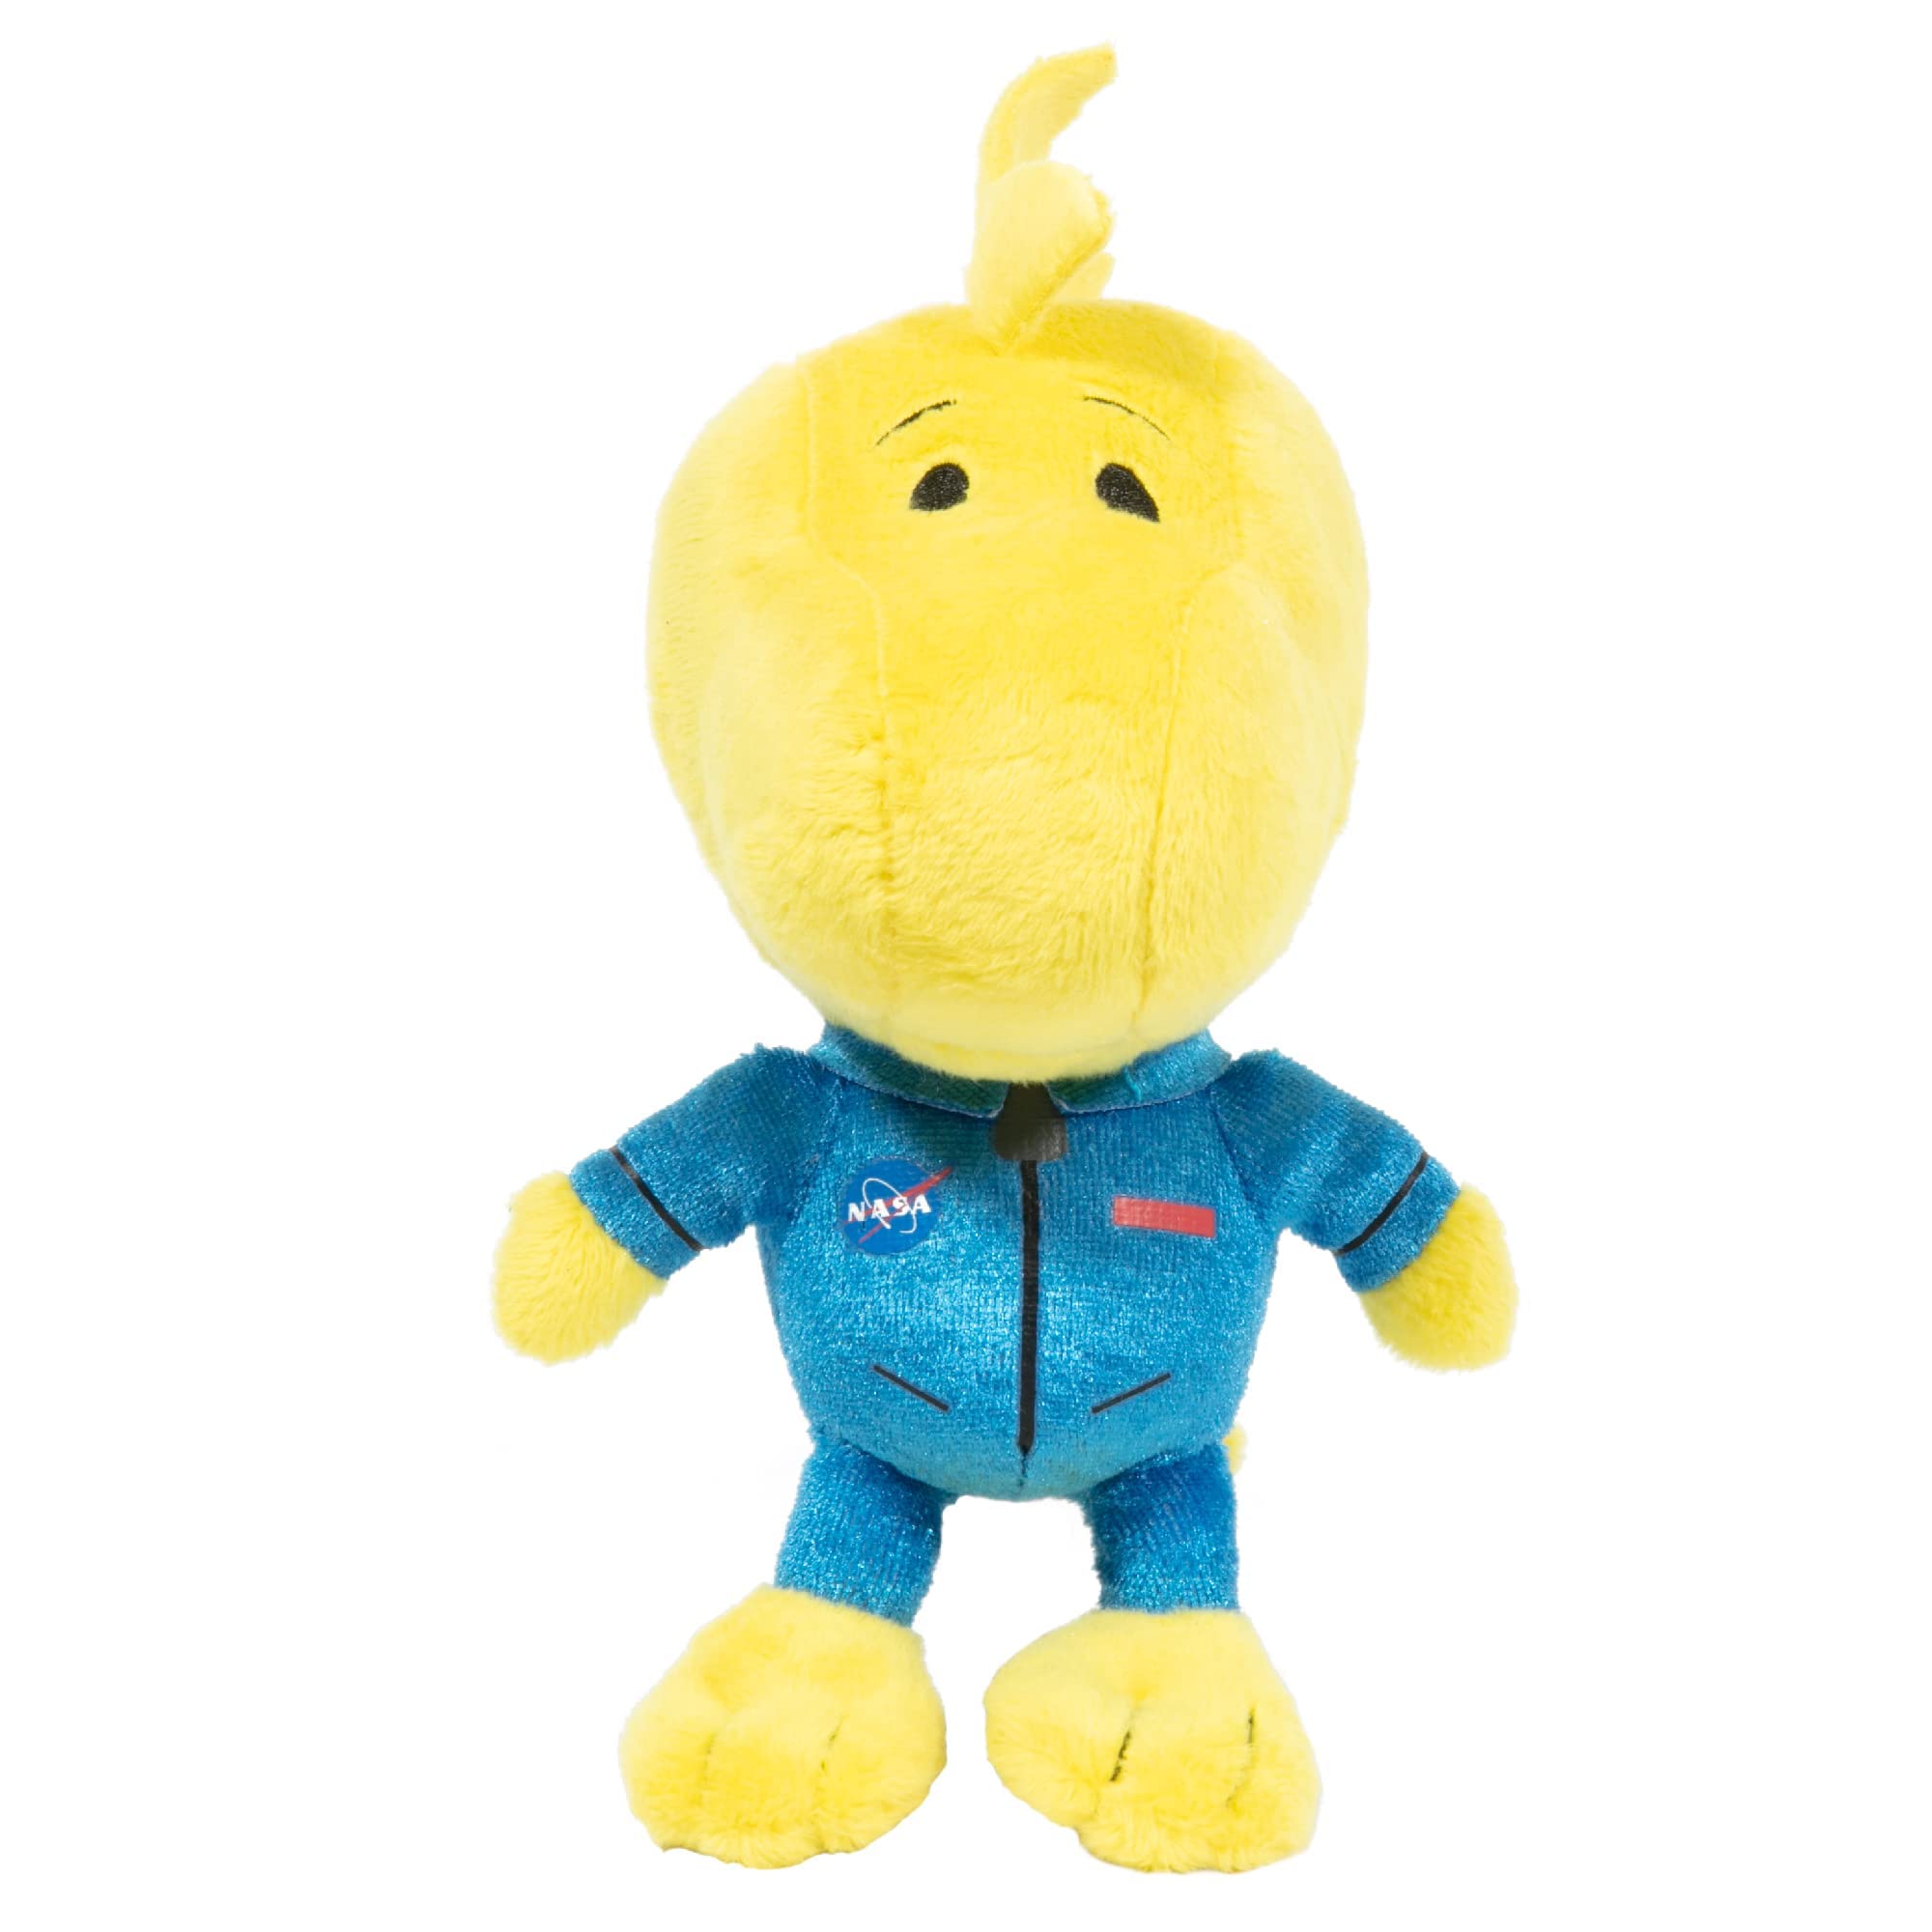 Jinx Official Peanuts Collectible Plush Woodstock, Excellent Plushie Toy for Toddlers & Preschool, Blue NASA Astronaut, Snoopy Team